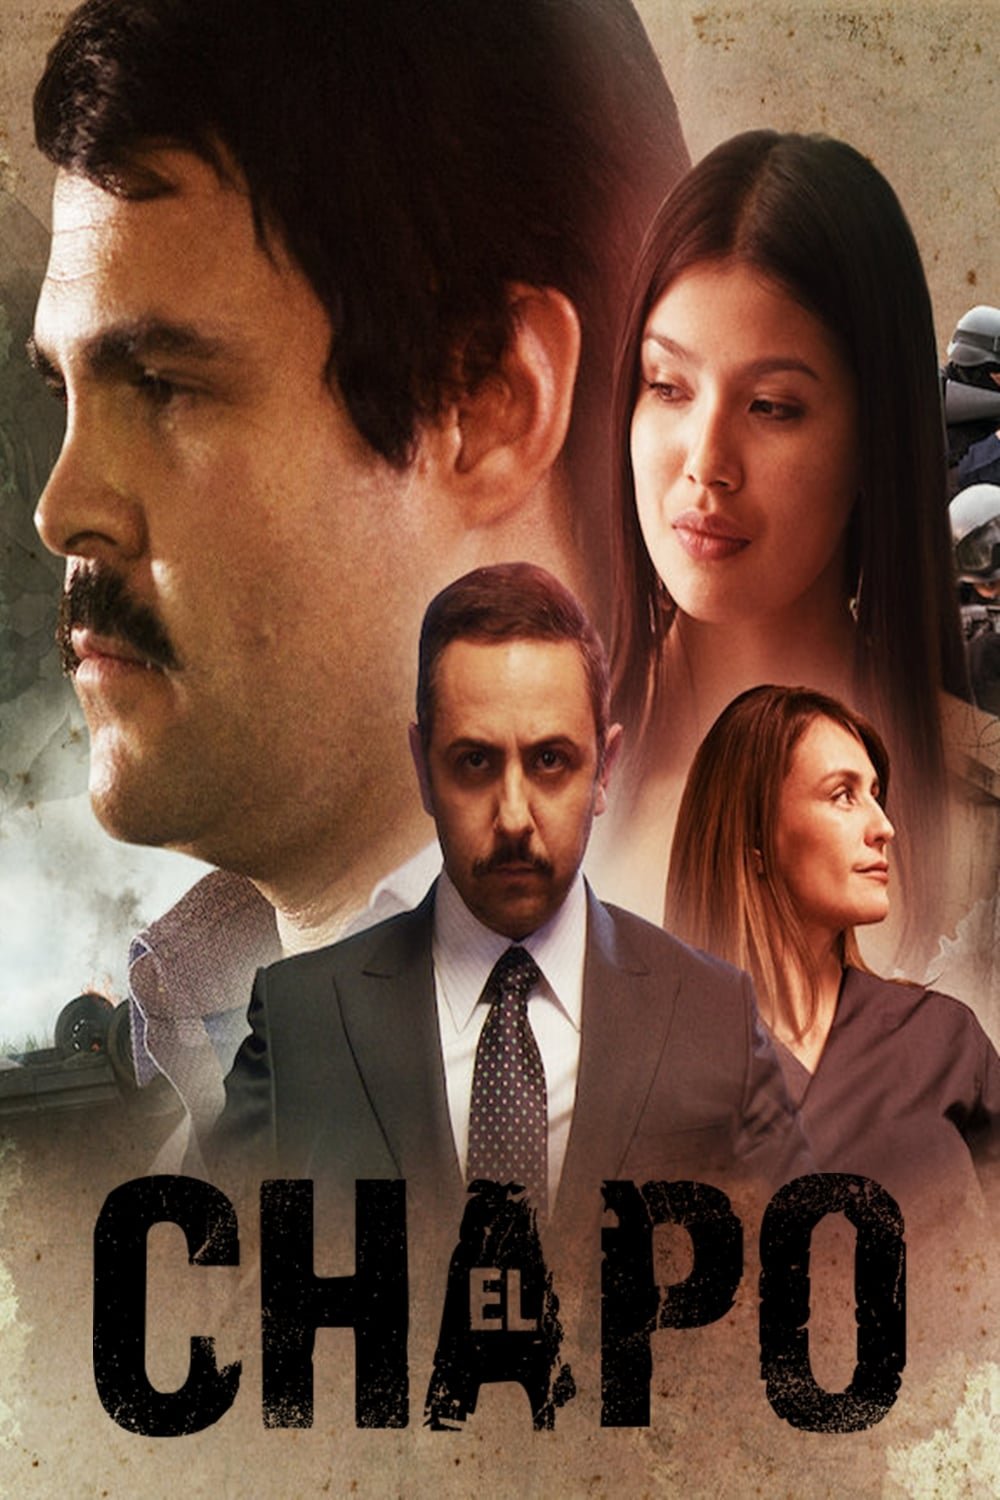 How to watch and stream Juan Pablo Gamboa movies and TV shows